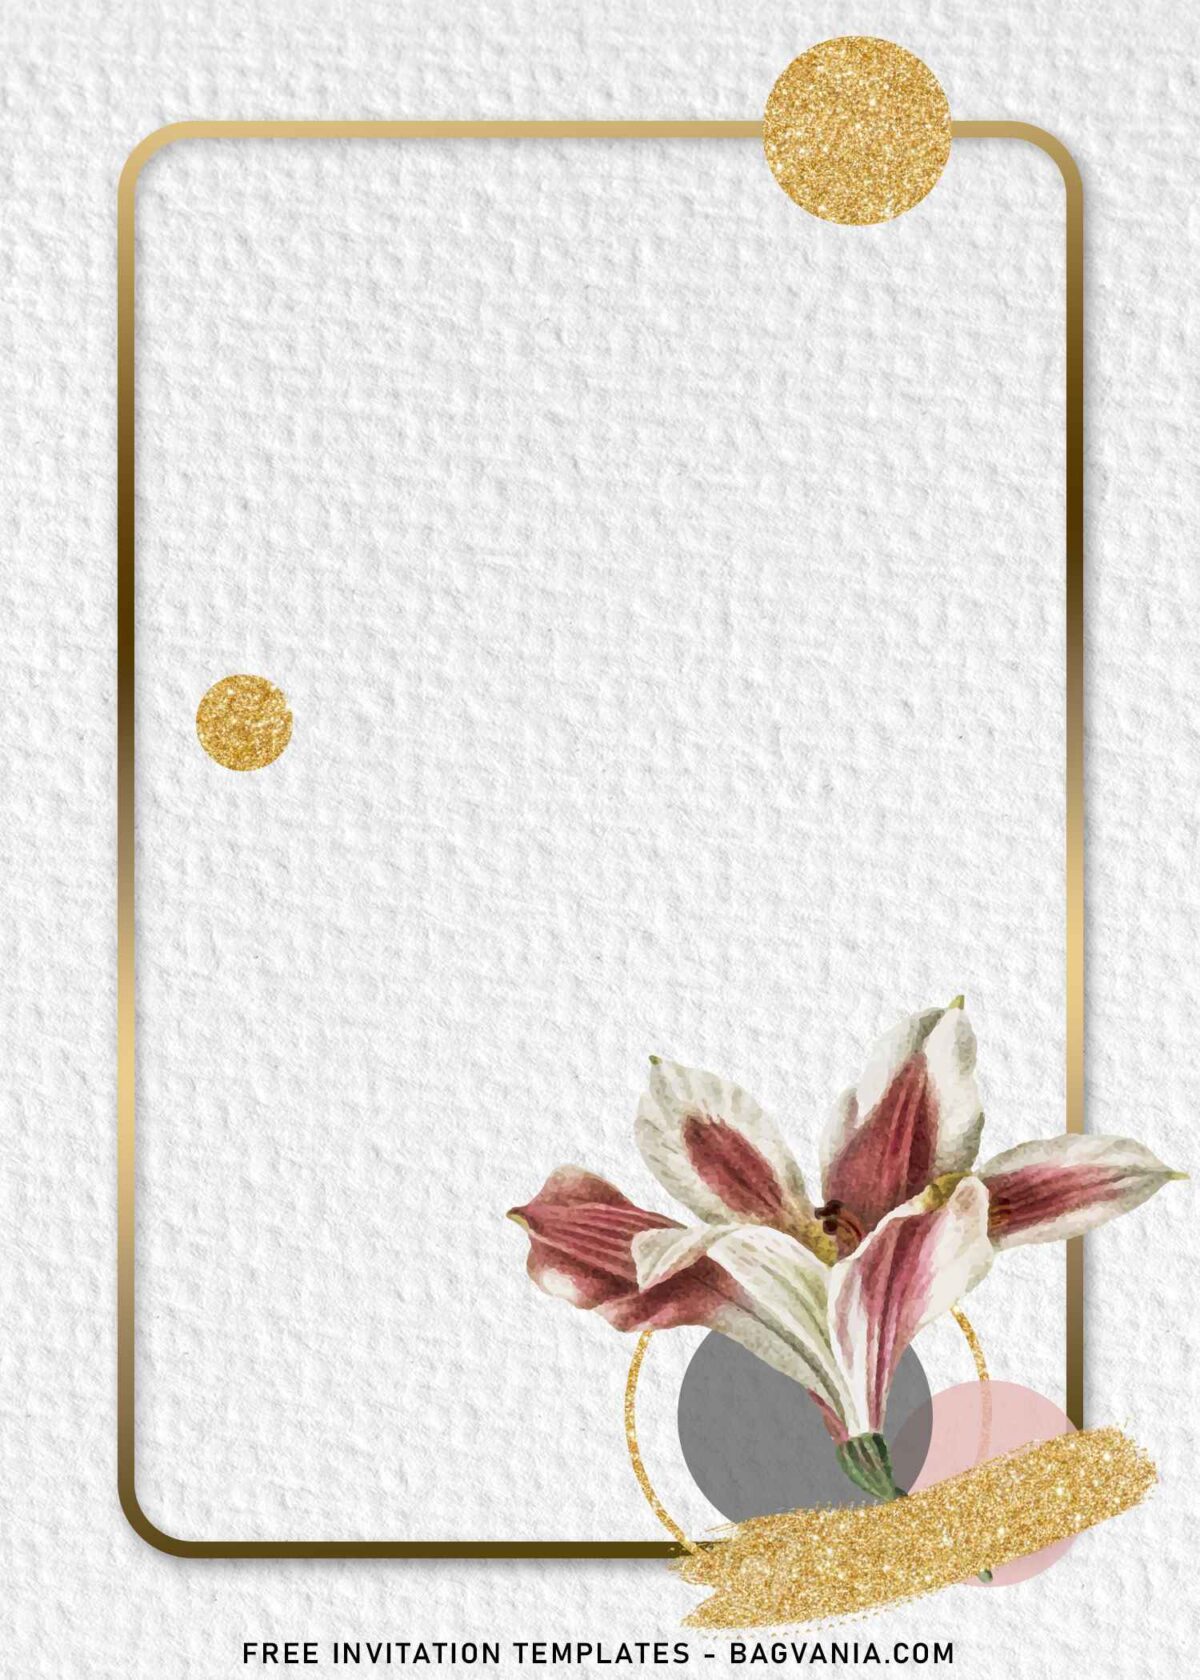 9+ Finest Paper Blooms Birthday Invitation Templates with Sparkling Gold glitter elements